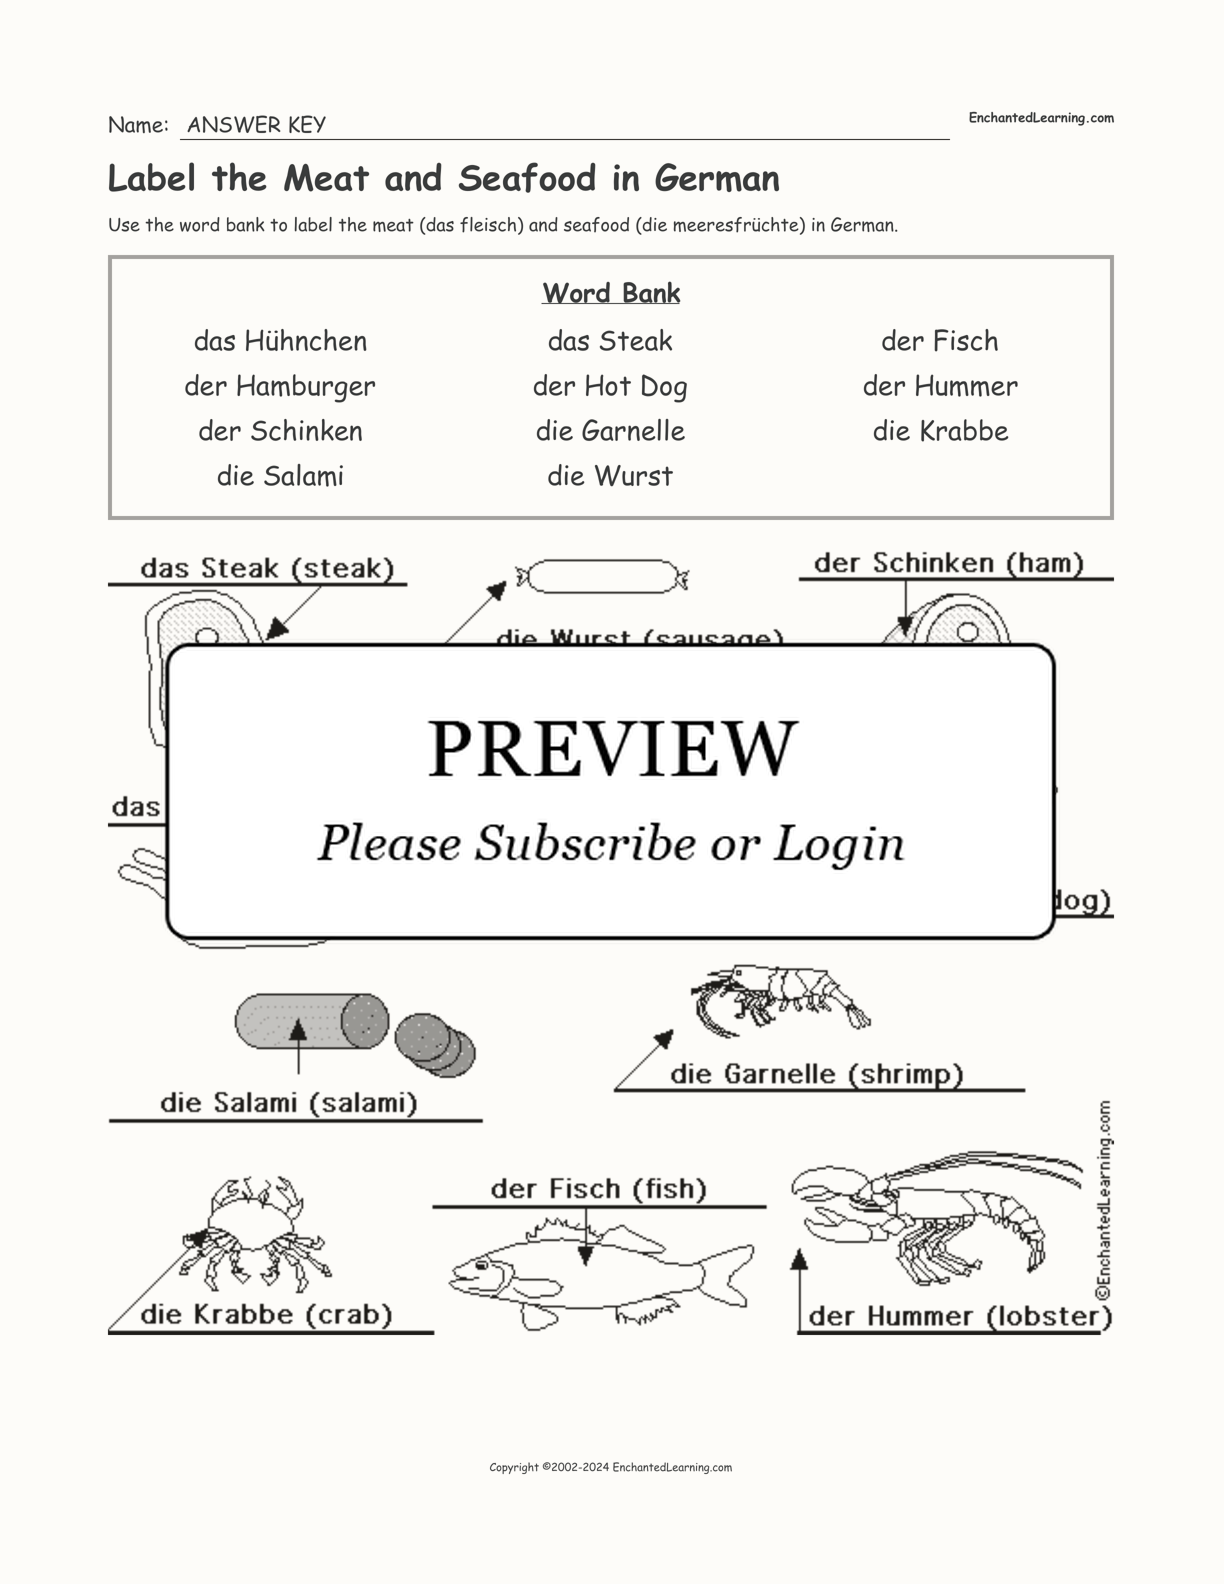 Label the Meat and Seafood in German interactive worksheet page 2